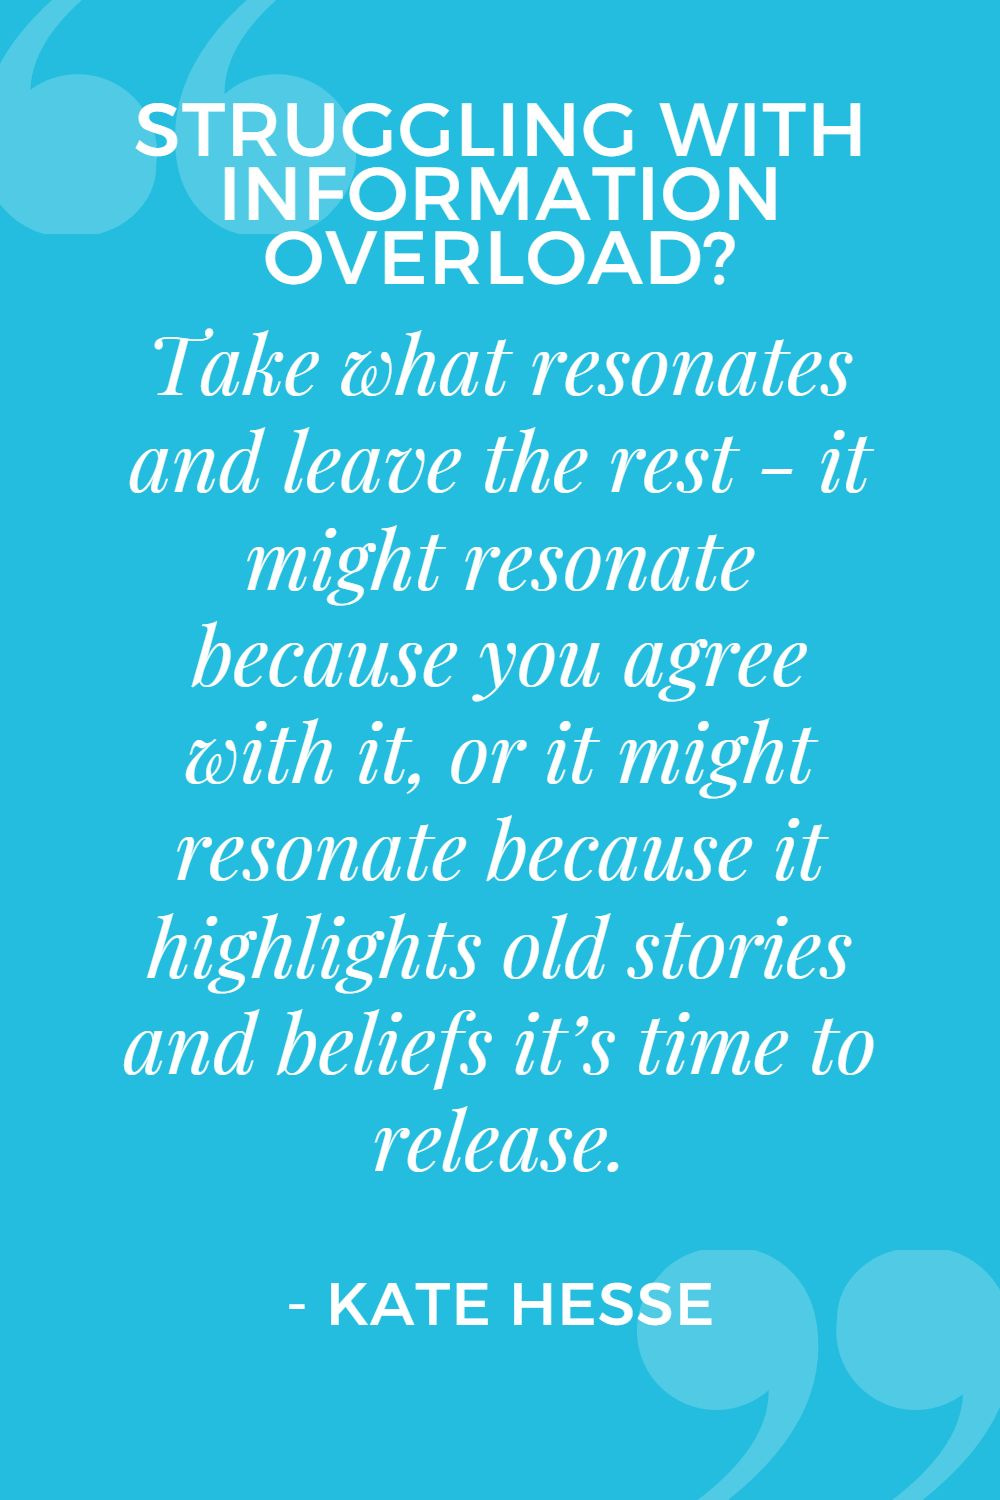 Take what resonates and leave the rest - it might resonate because you agree wit hit, or it might resonate because it highlights old stories and beliefs it's time to release.